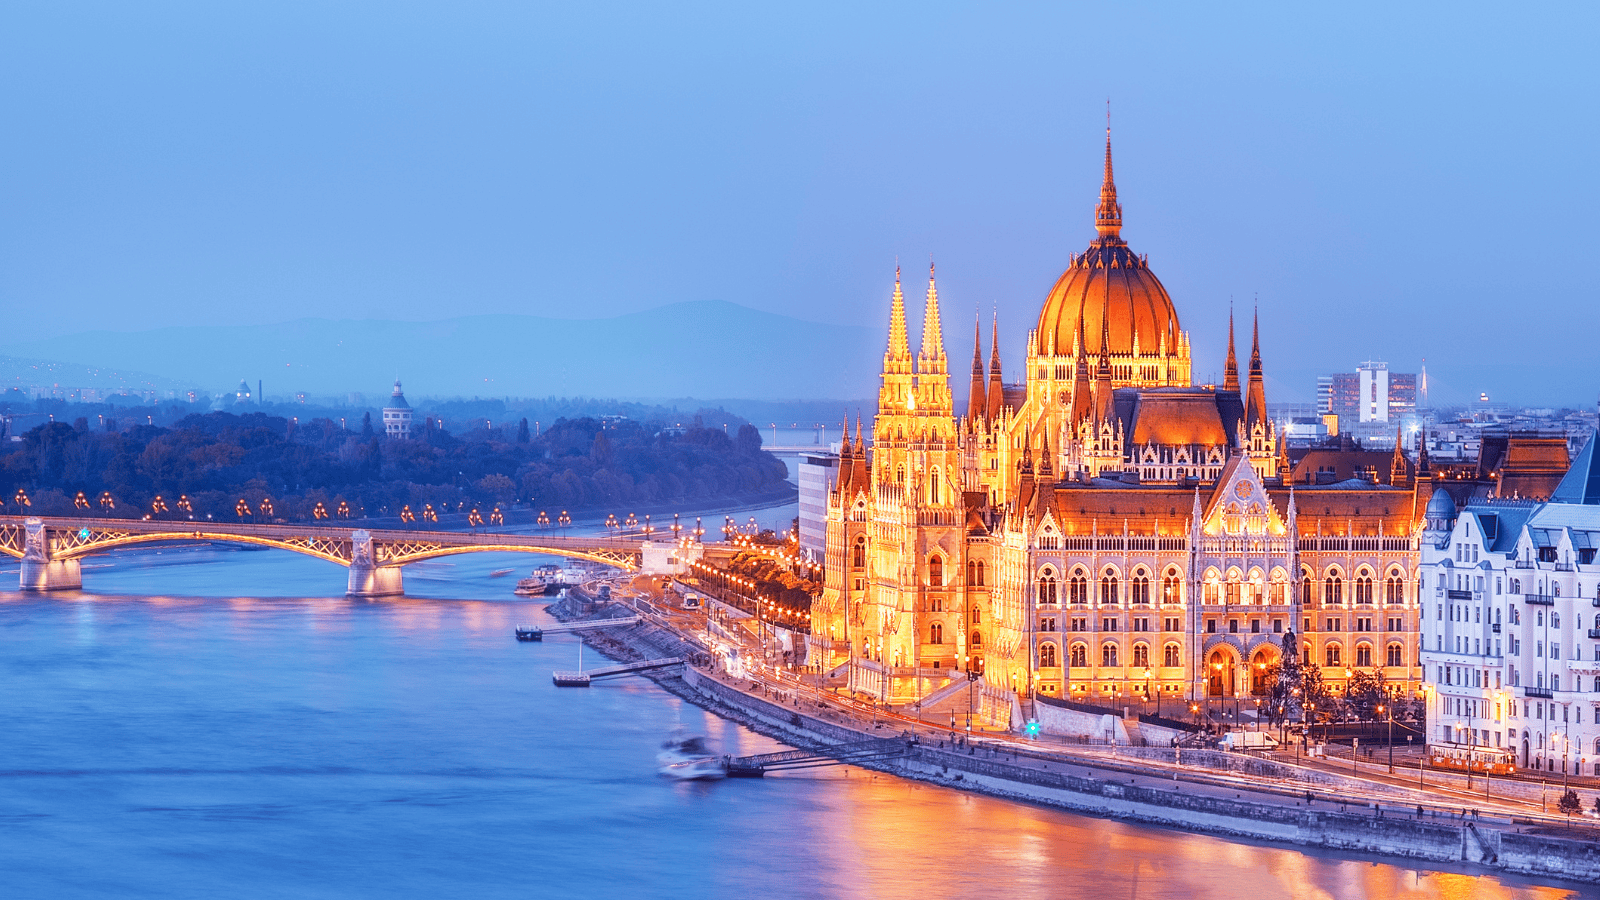 <p>Hop aboard the <a href="https://www.amawaterways.com/destination/europe-river-cruises/2024/legendary-danube" rel="nofollow external noopener noreferrer">Legendary Danube</a> river cruise offered by AmaWaterways, and prepare to be amazed. The cruise departs from Nuremberg, a charming German city, and sails for seven days through Austria, ending in Budapest, Hungary. </p><p>Legendary Danube is the ideal European vacation for history lovers. Passengers will tour <a href="https://whatthefab.com/bucket-list-unesco-world-heritage-sites.html" rel="follow">UNESCO World Heritage Sites</a>, sample regional delicacies, and admire the centuries-old architecture. The ships that make this voyage have elegant amenities for a 5-star stay from start to finish.</p>